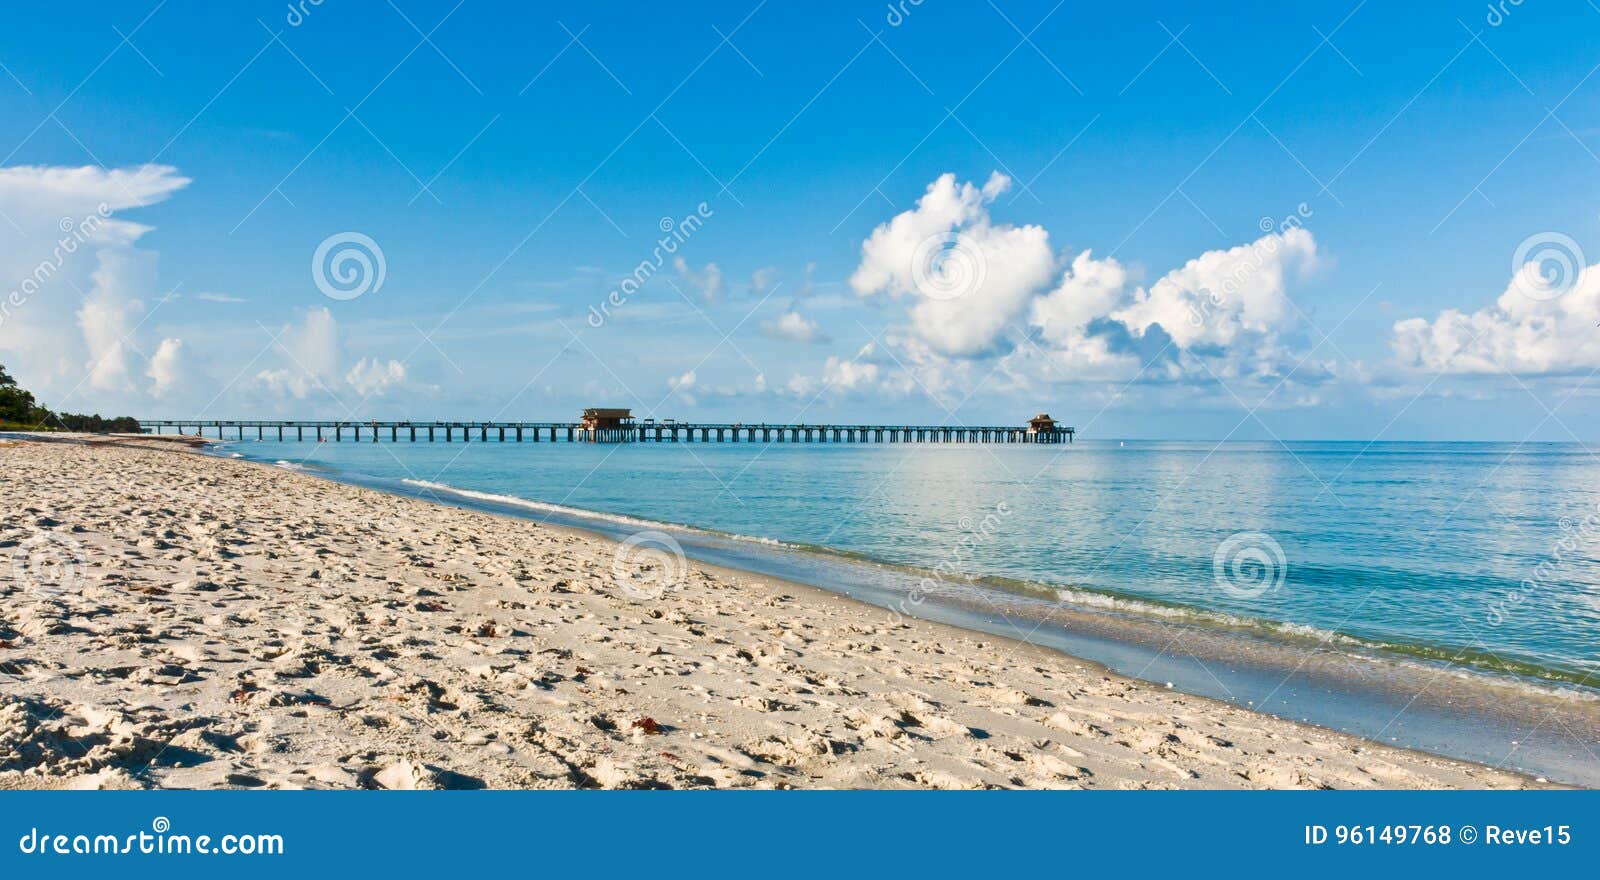 comercial pier on the tropical west coast of florida